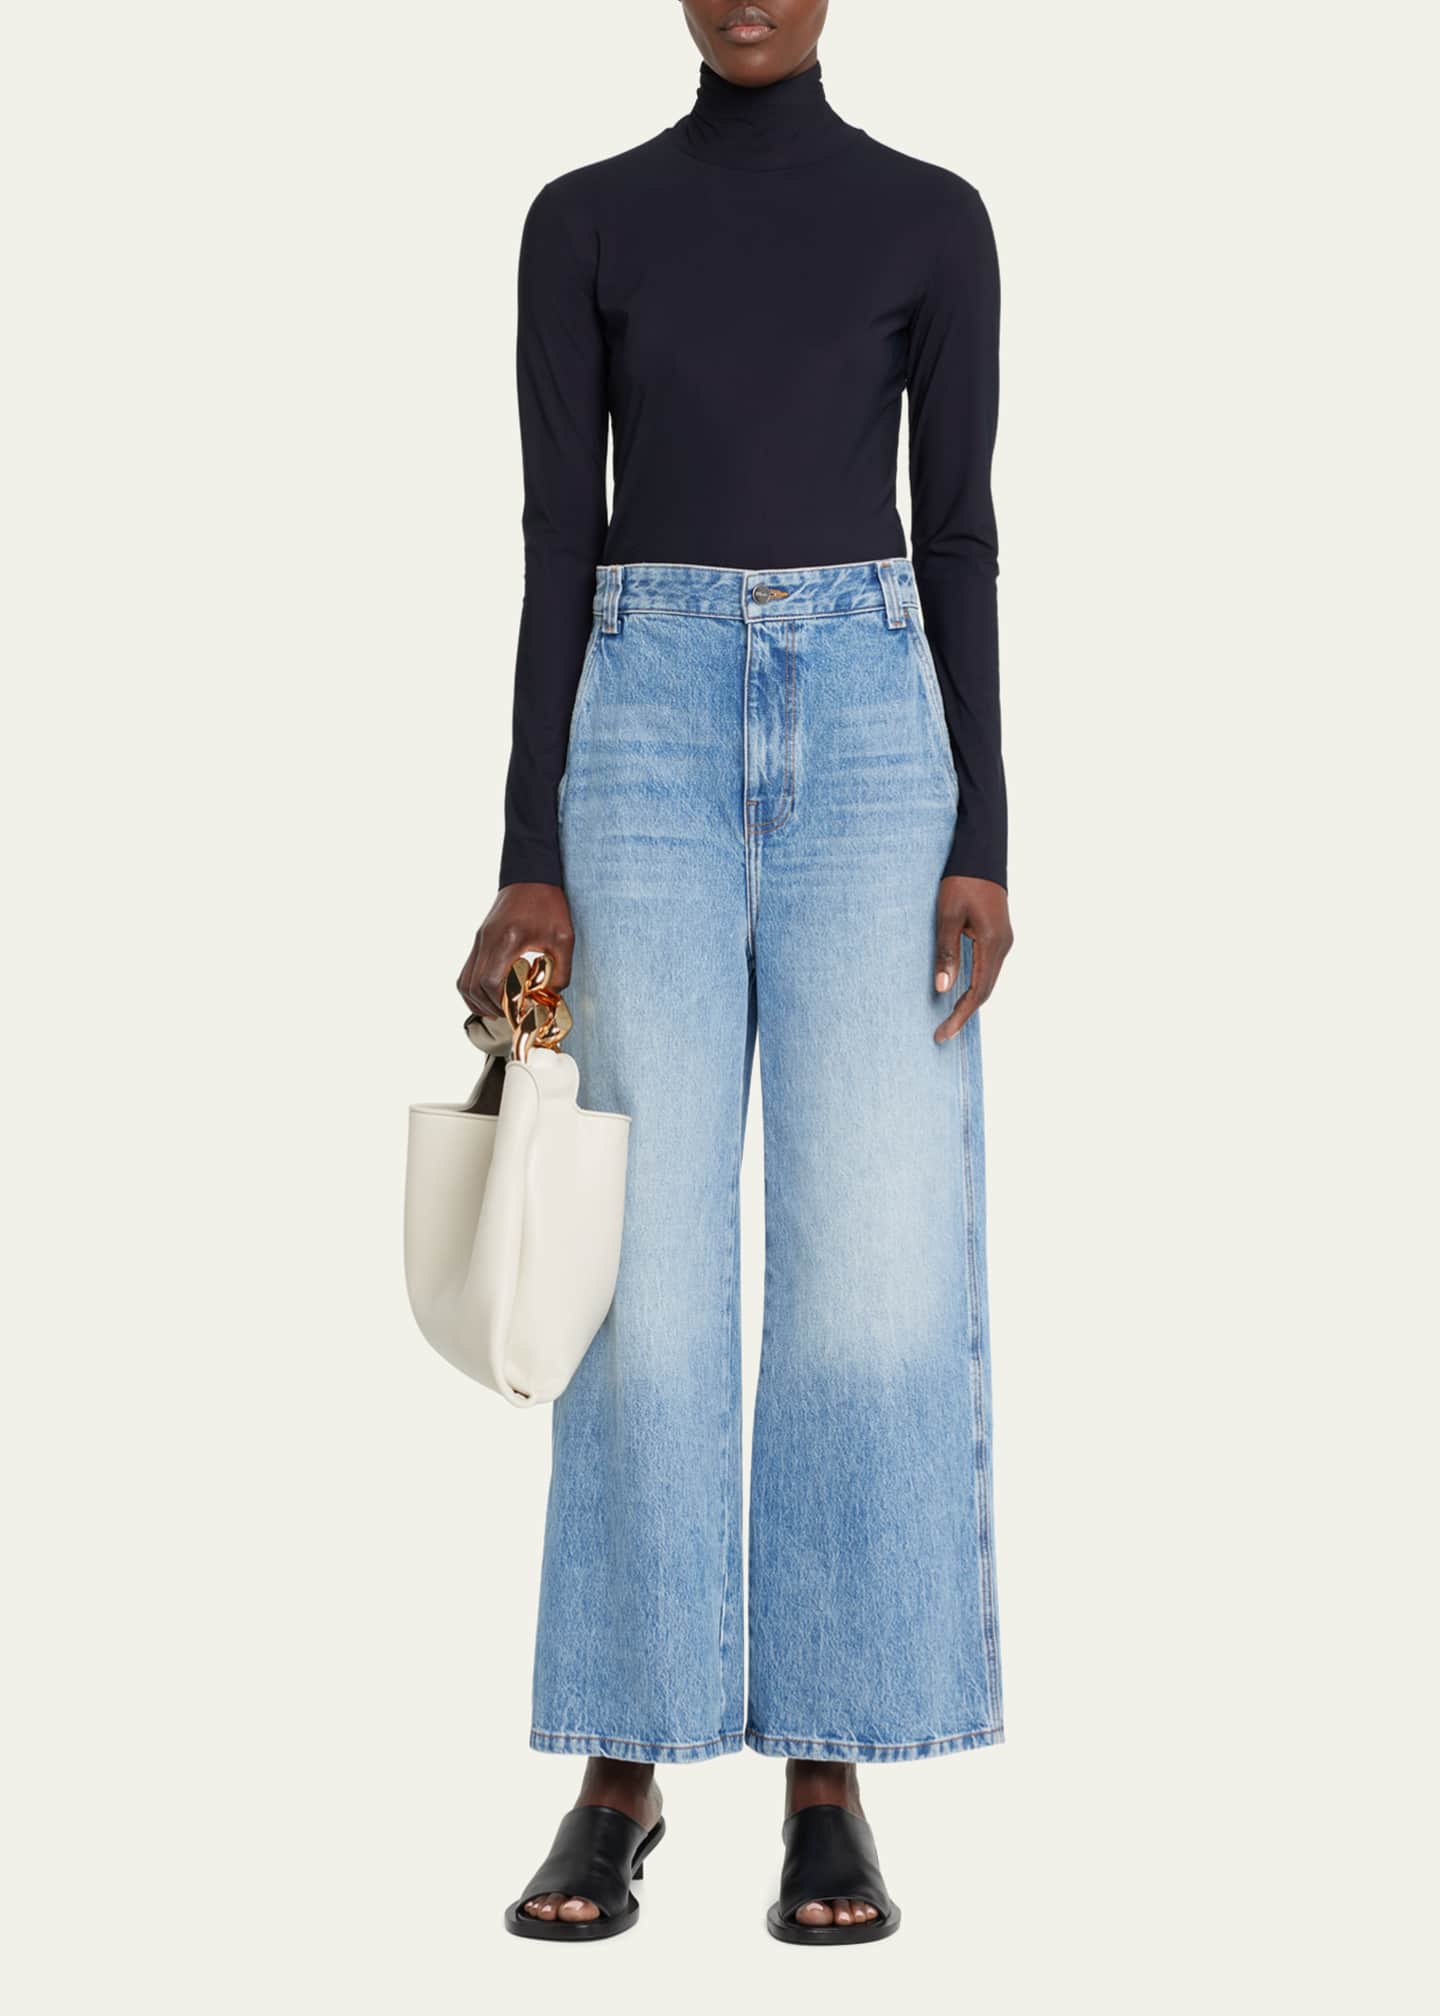 JW Anderson Small Knot Chain Leather Top-Handle Bag - Bergdorf Goodman